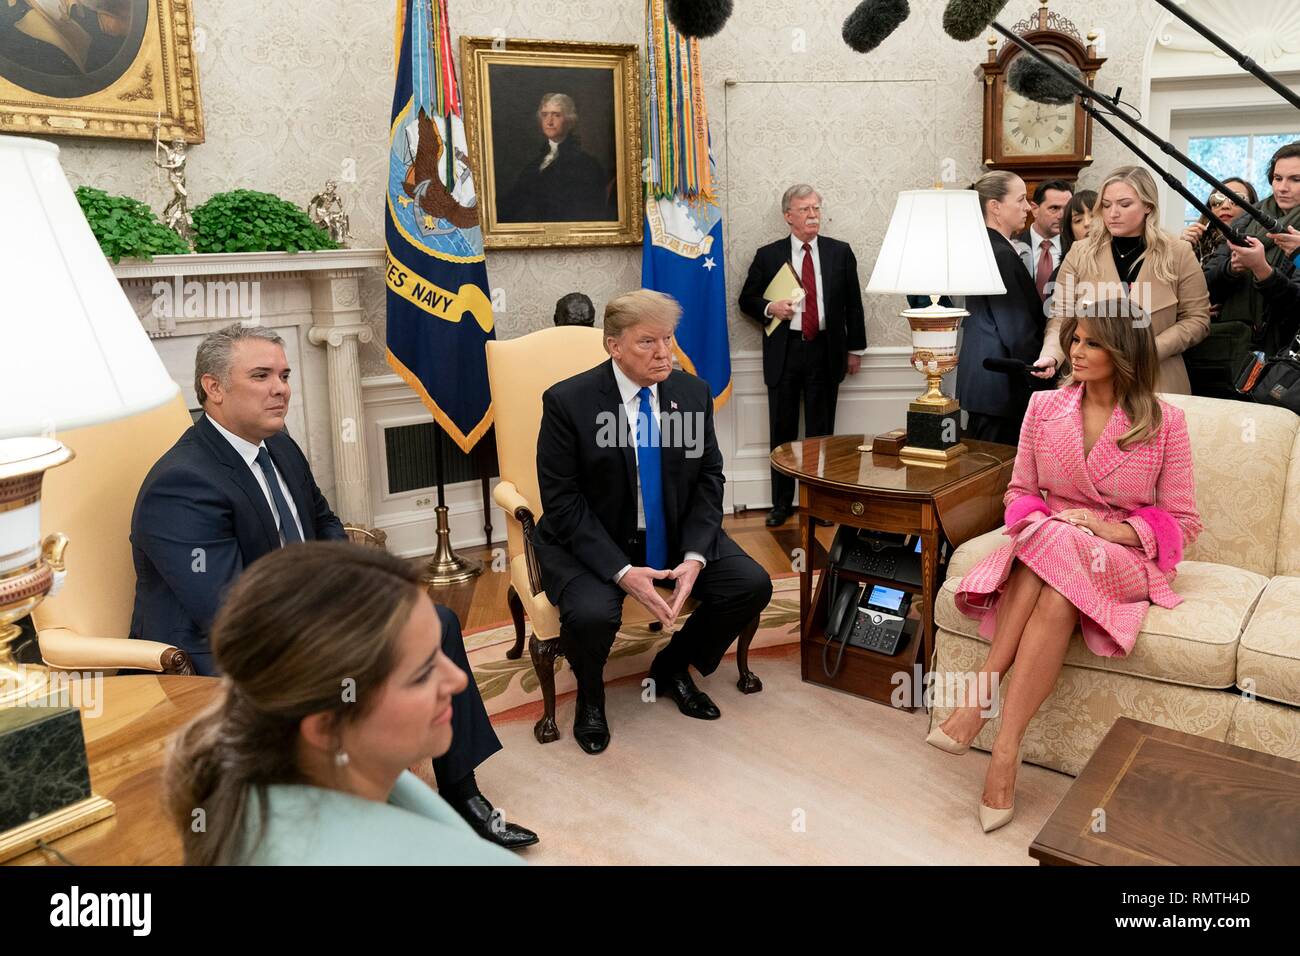 U.S President Donald Trump and First Lady Melania Trump meet with Colombian President Ivan Duque Marquez and his wife Maria Juliana Ruiz in the Oval Office of the White House February 13, 2019 in Washington, DC. Stock Photo